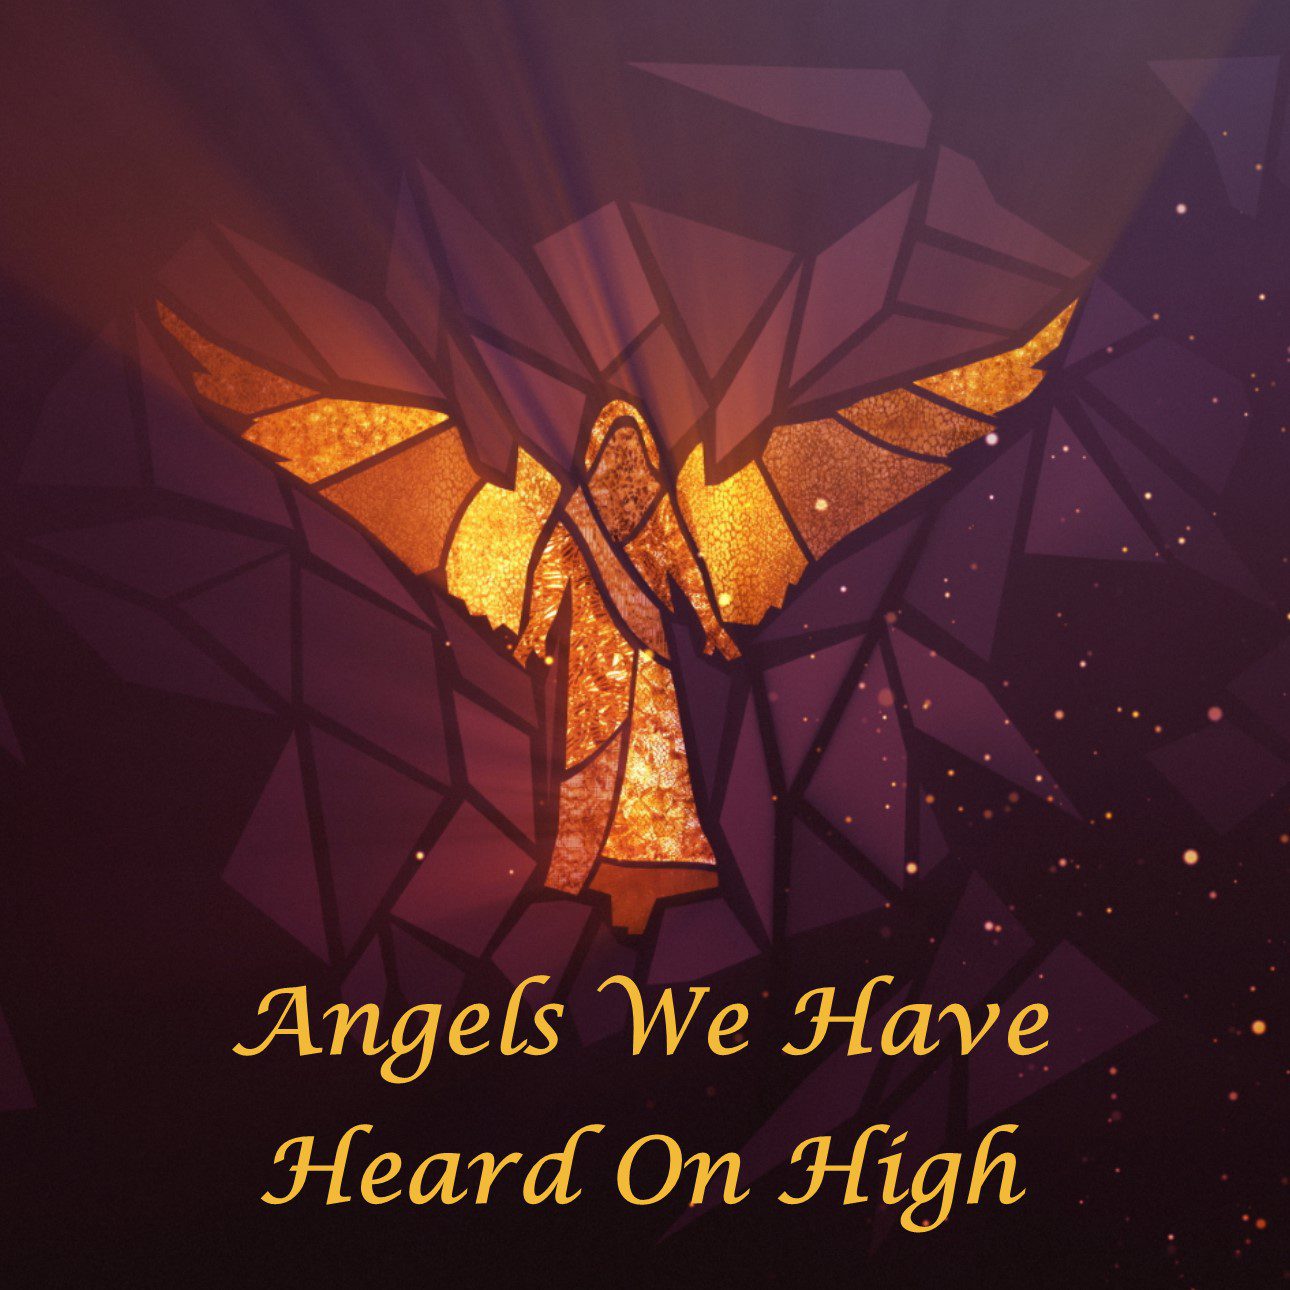 Midweek 2 – Angels We Have Heard On High – Appearing to Mary